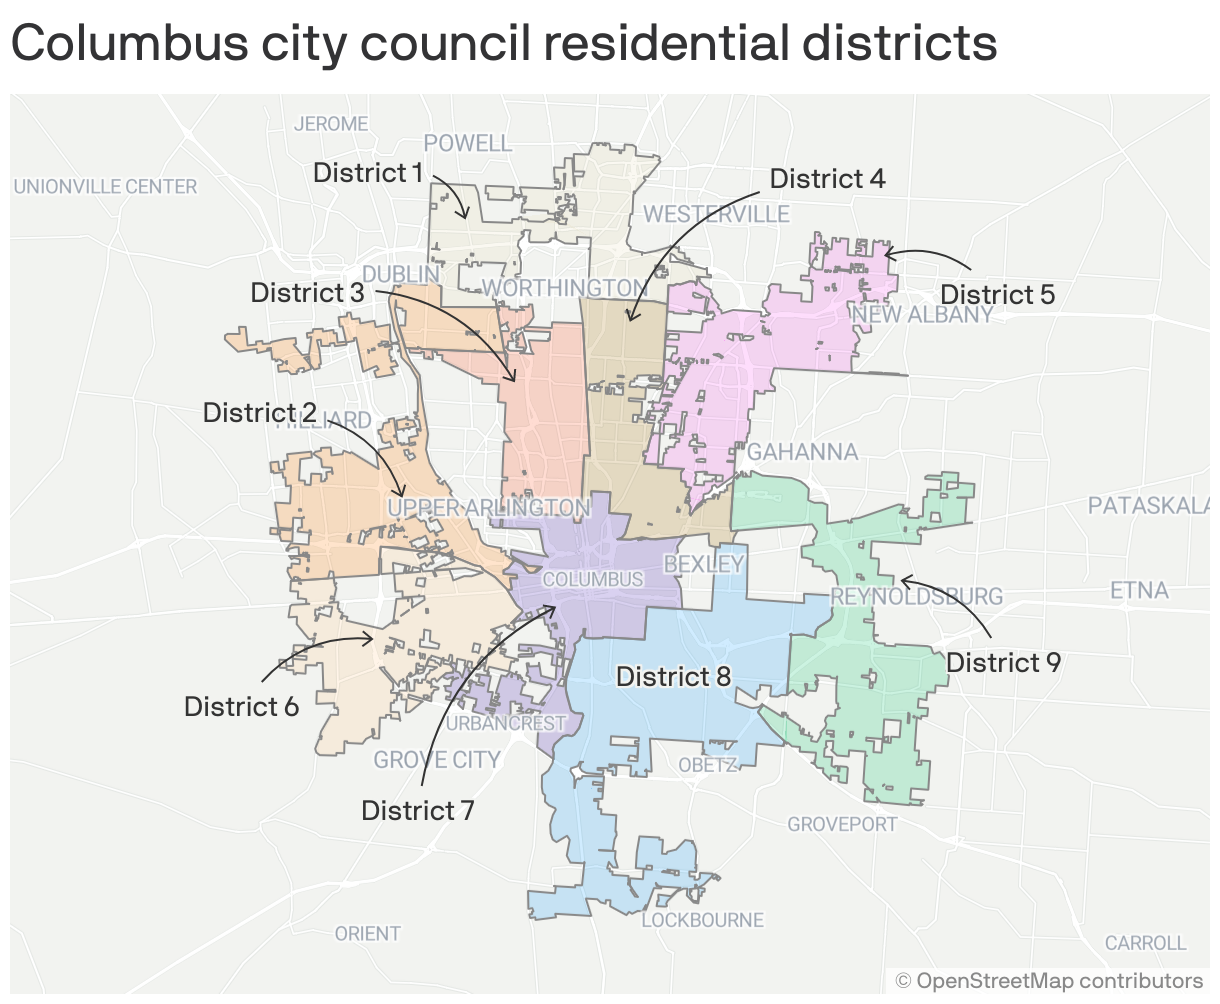 Columbus city council residential districts